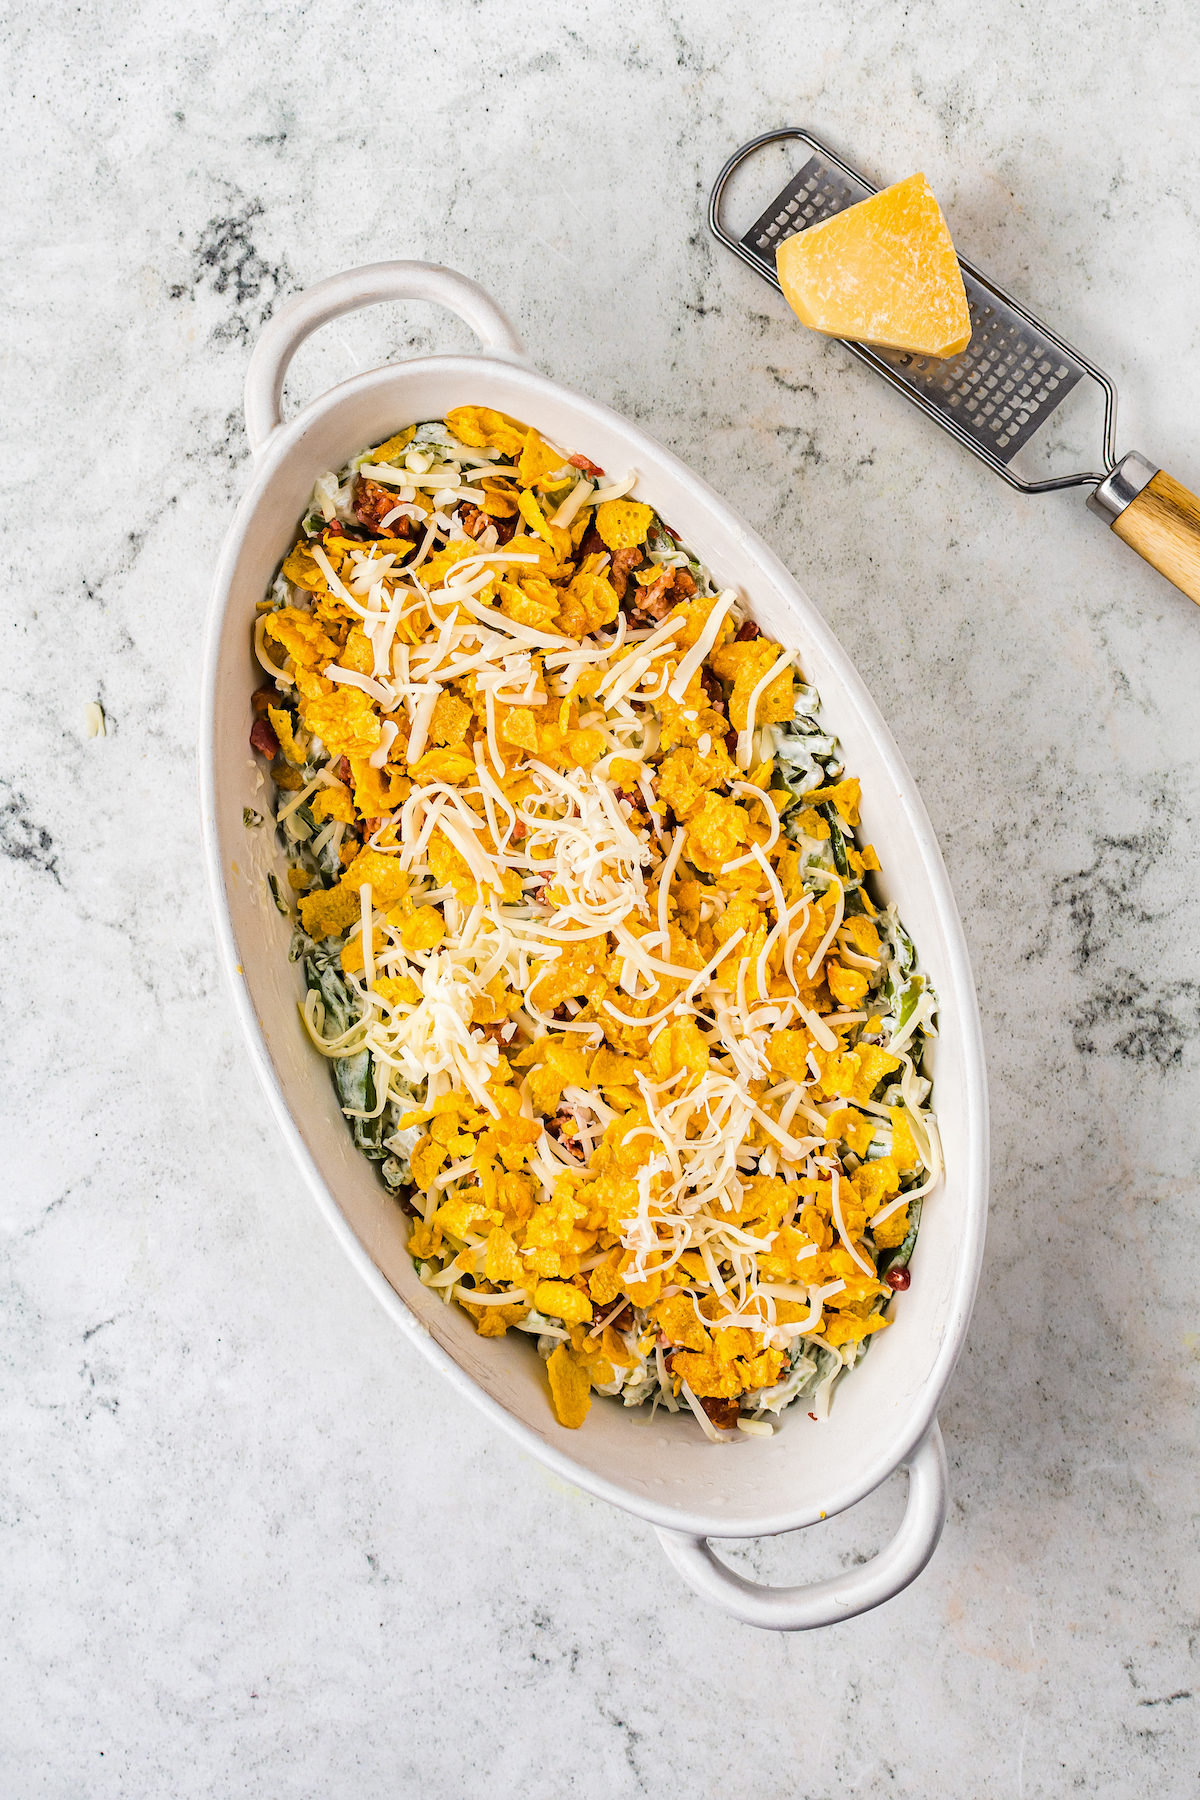 An unbaked casserole topped with green beans, cornflakes, and cheese.